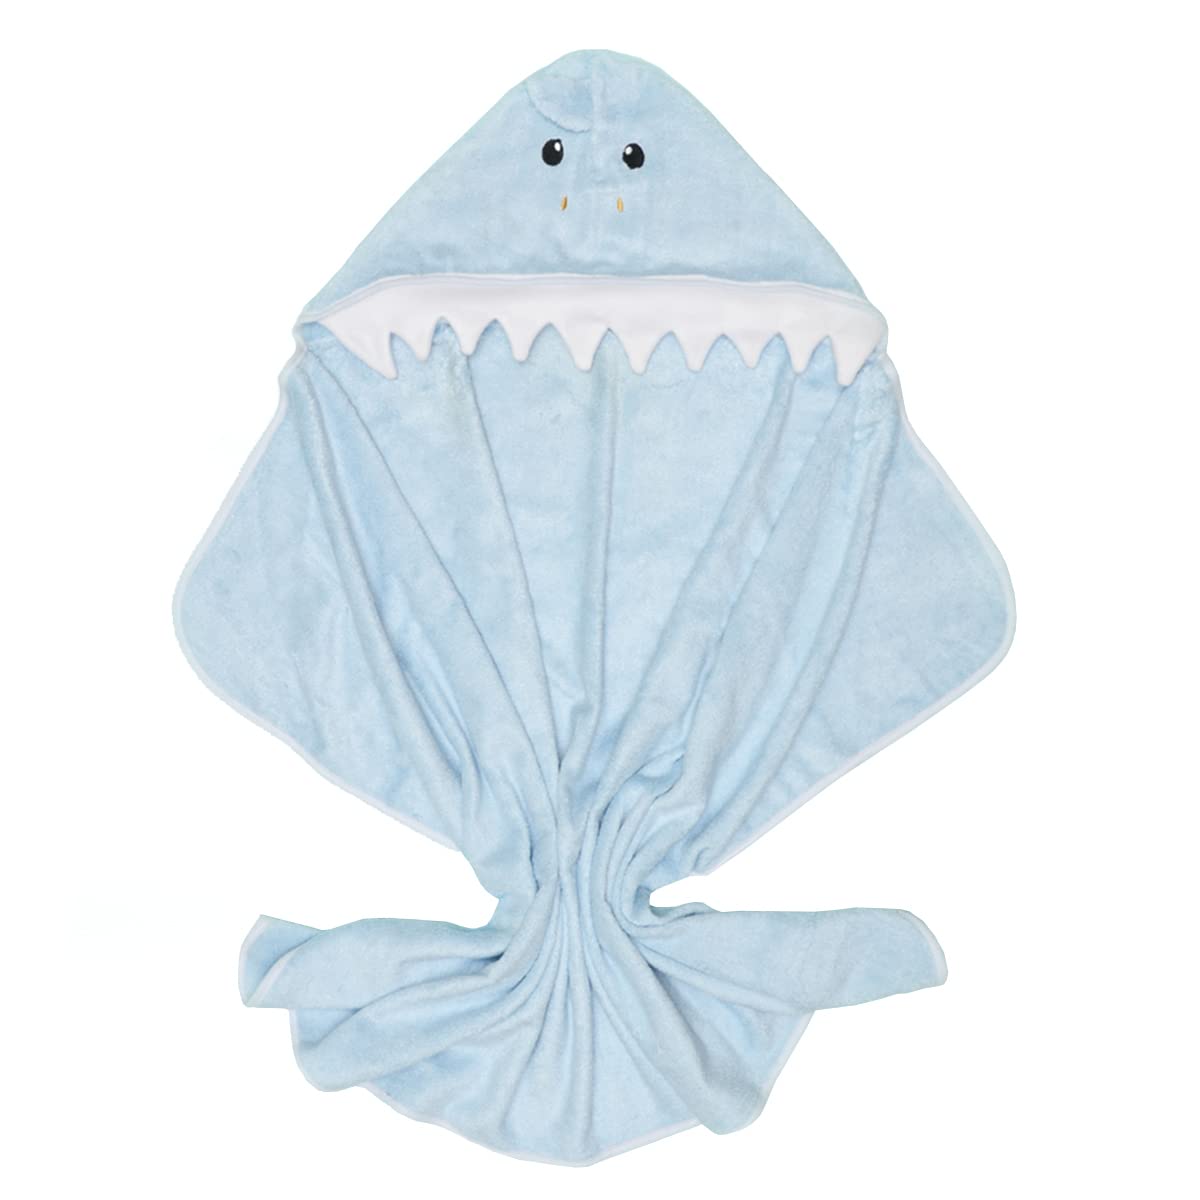 SNUGKINS Bamboo Hooded Baby Towel - Premium Soft Hooded Bath Towel for Baby, Toddler, Infant, for Boy and Girl - Baby Shark